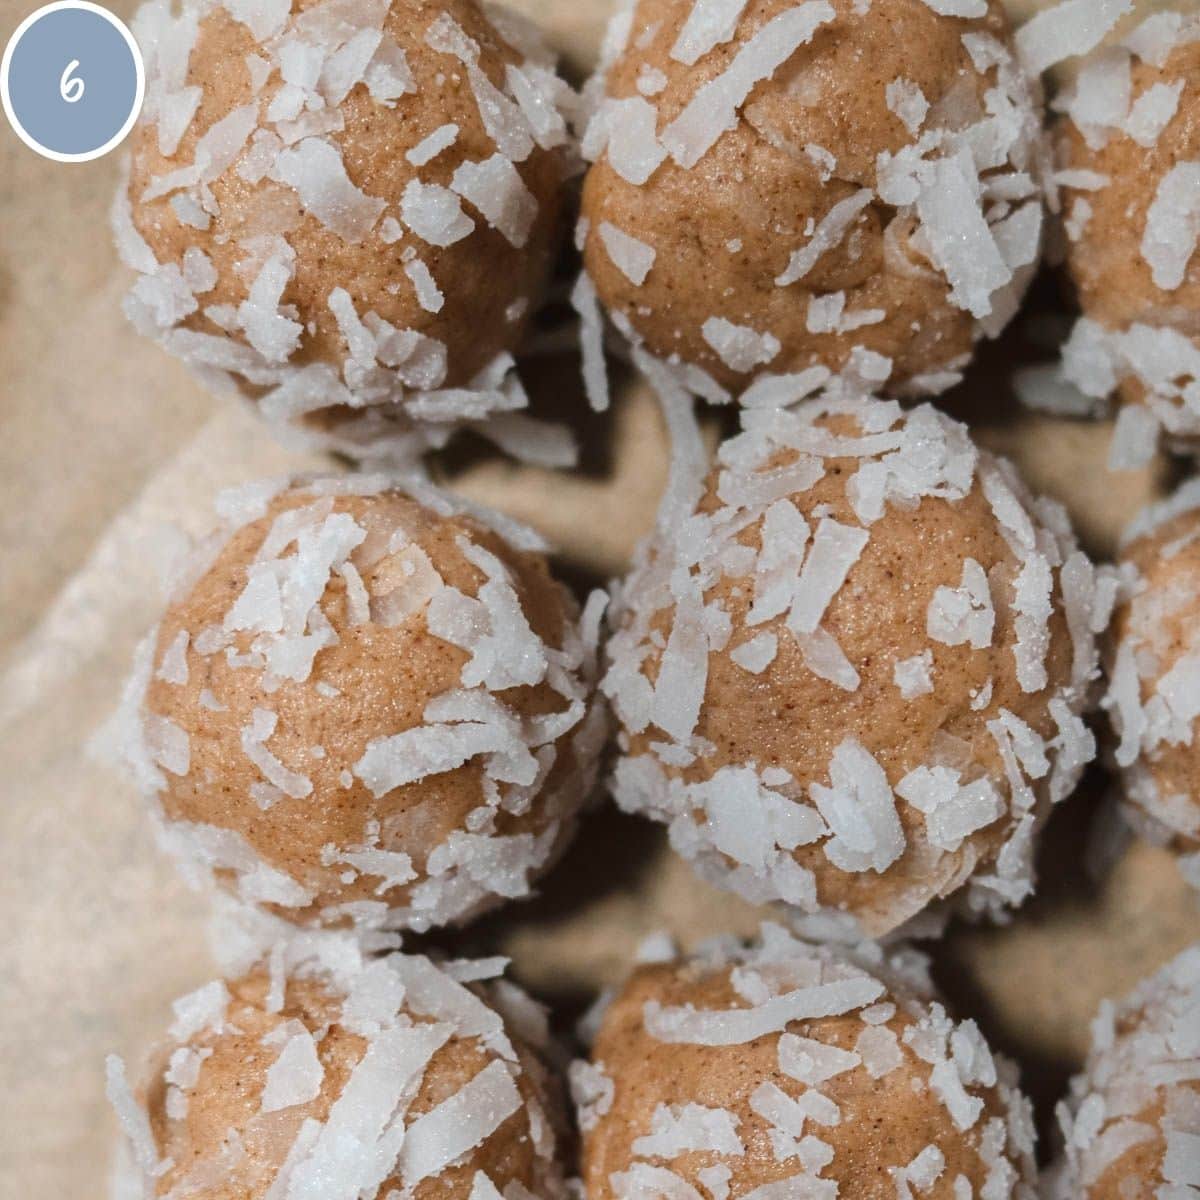 Balls of cookie dough rolled in shredded coconut.